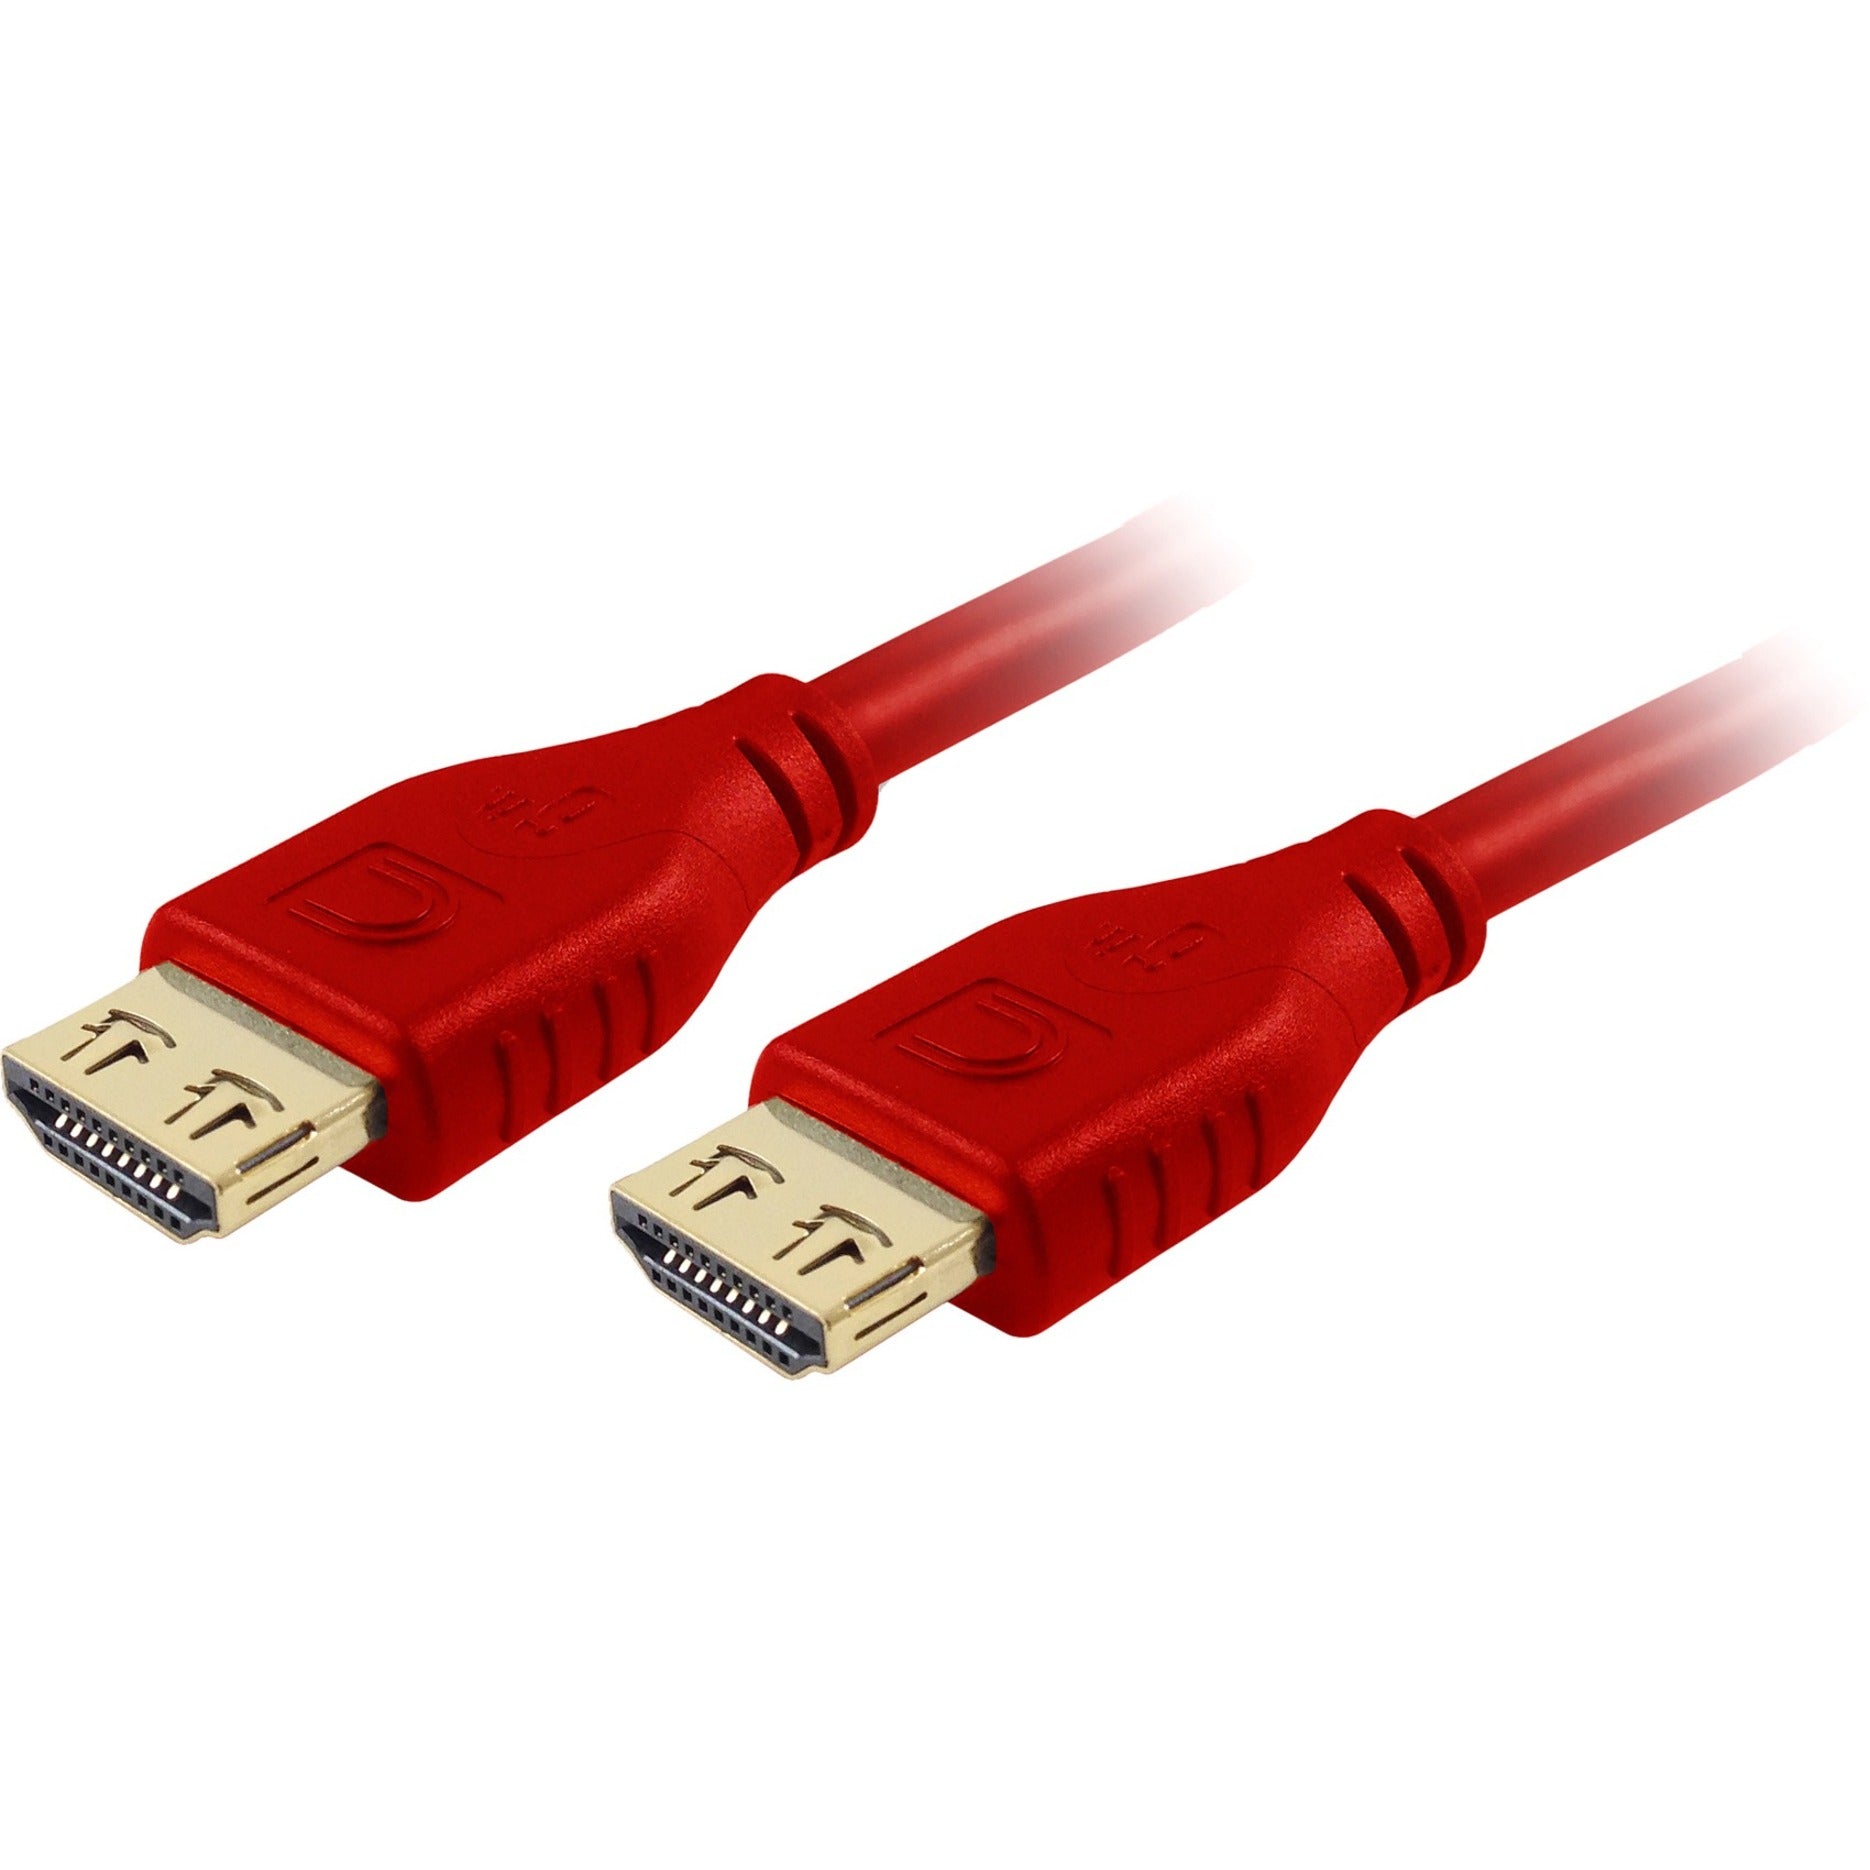 Comprehensive MHD-MHD-3PRORED MicroFlex Pro AV/IT Series High Speed HDMI Cable with ProGrip Deep Red 3ft, Lifetime Warranty, RoHS Certified